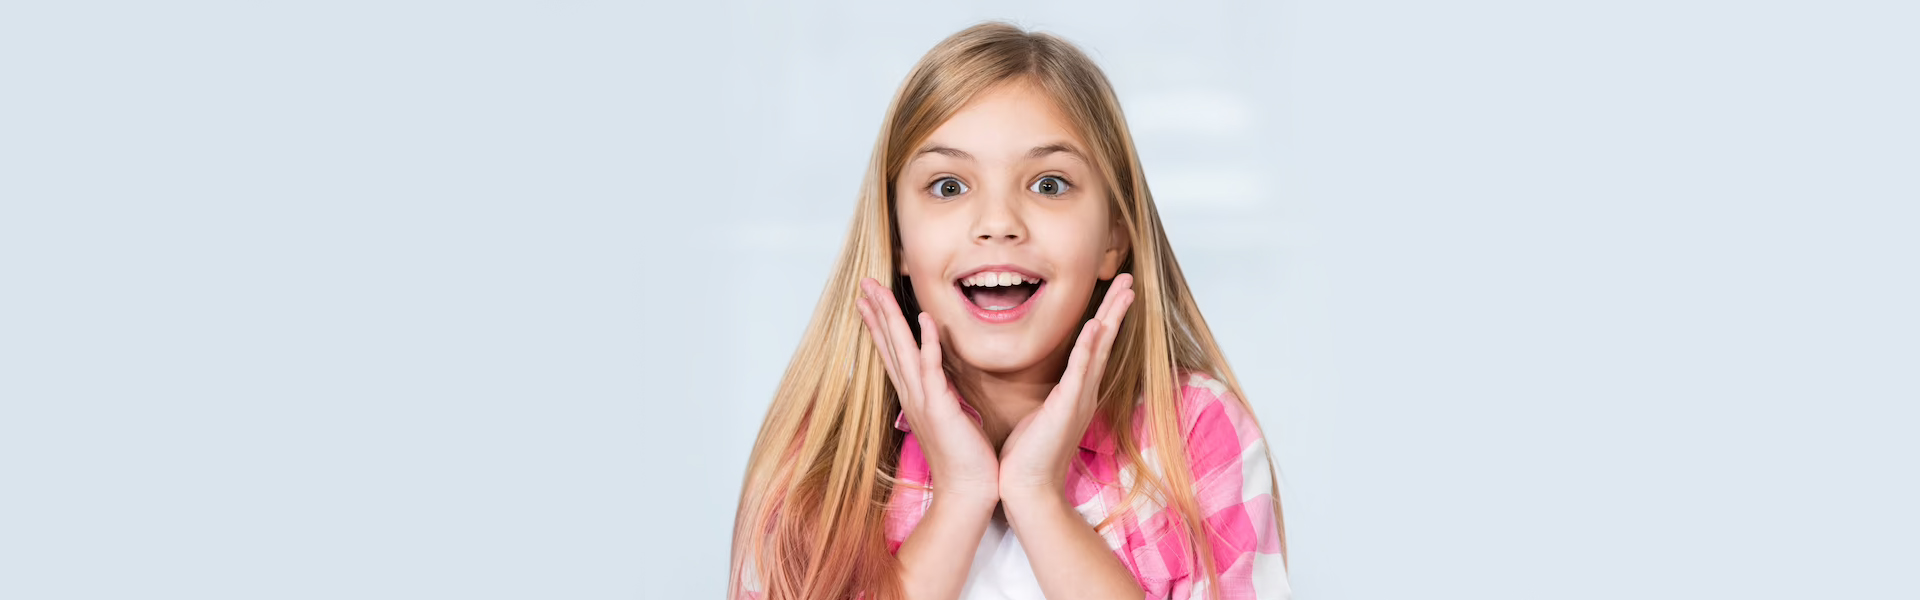 What to Look for in Children’s Dental Care